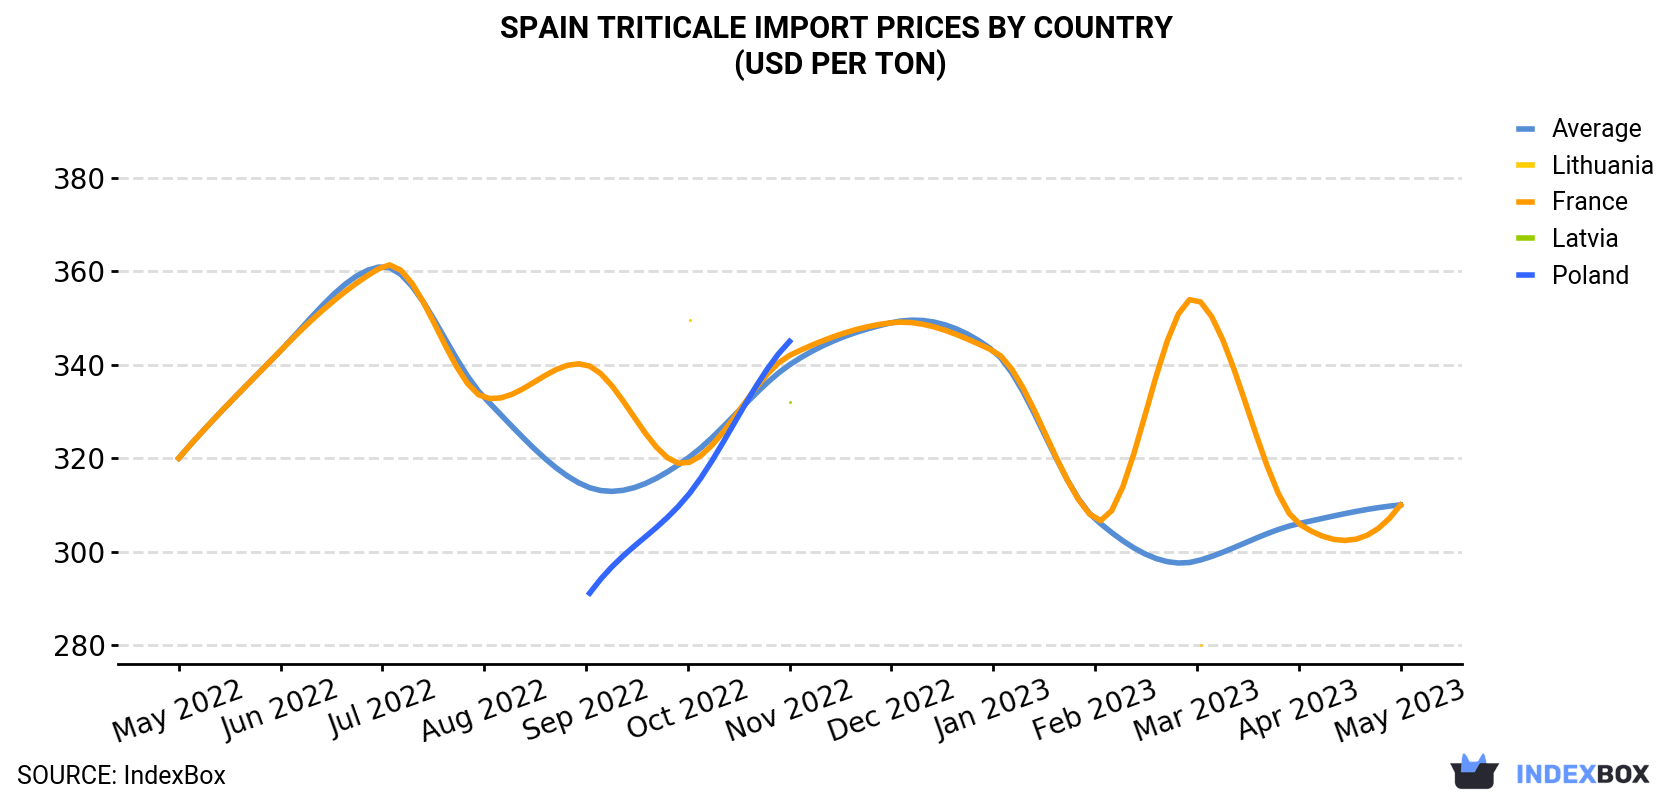 Spain Triticale Import Prices By Country (USD Per Ton)